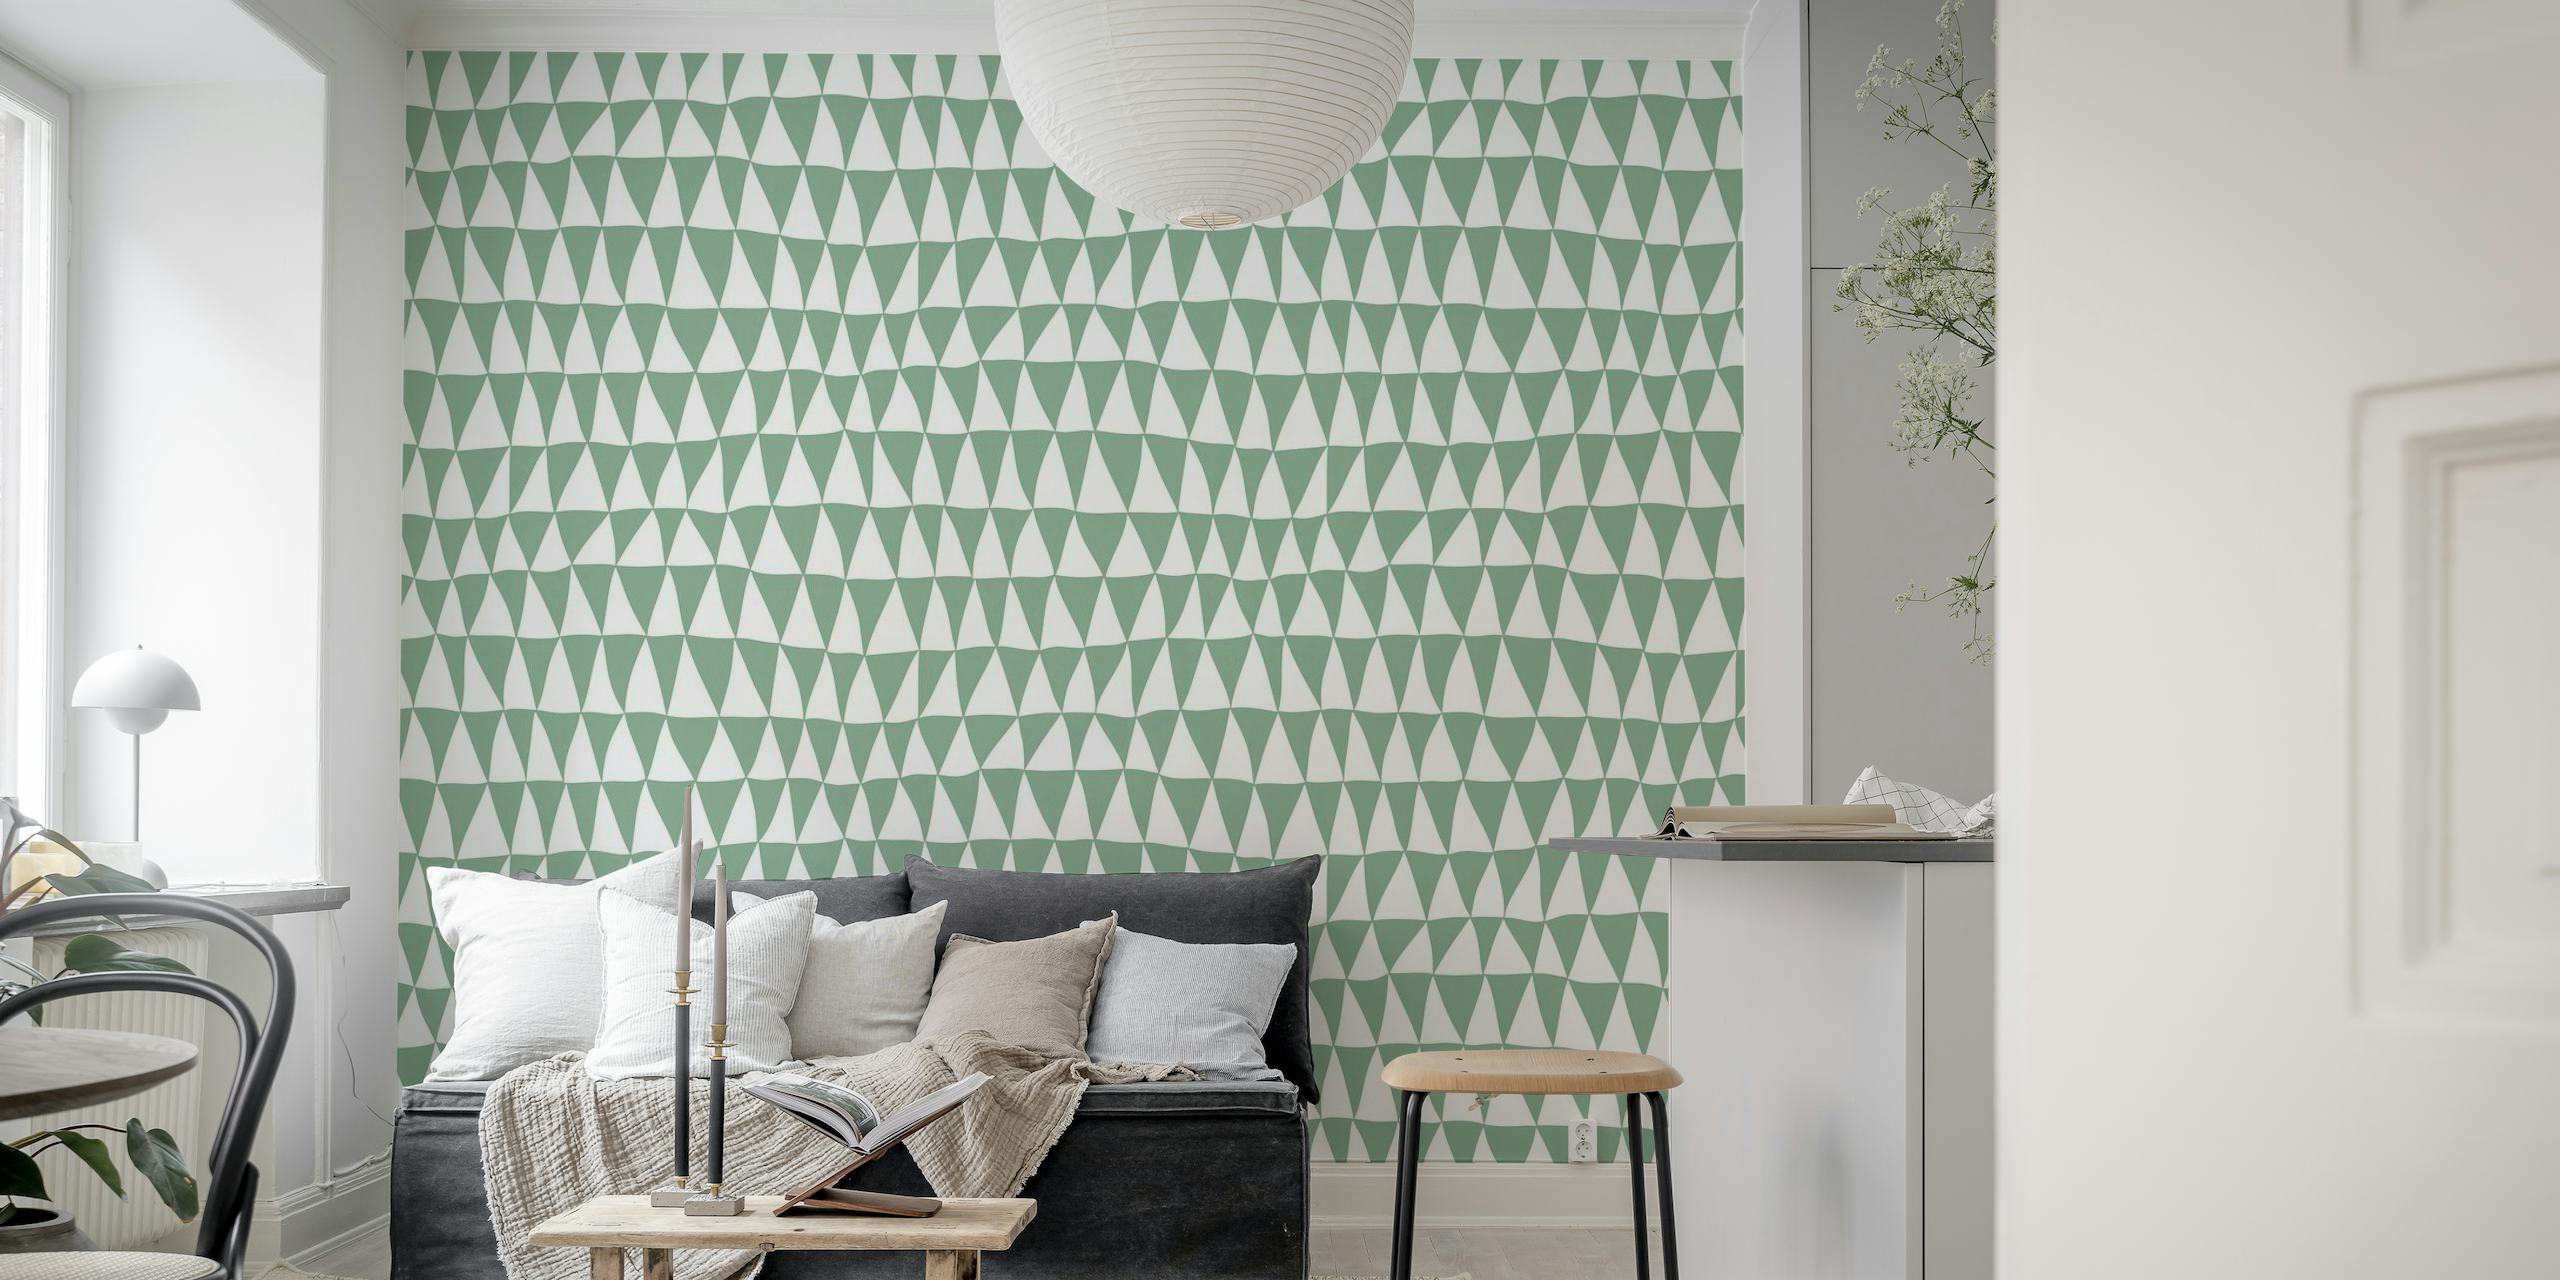 Green and white geometric triangle pattern wall mural